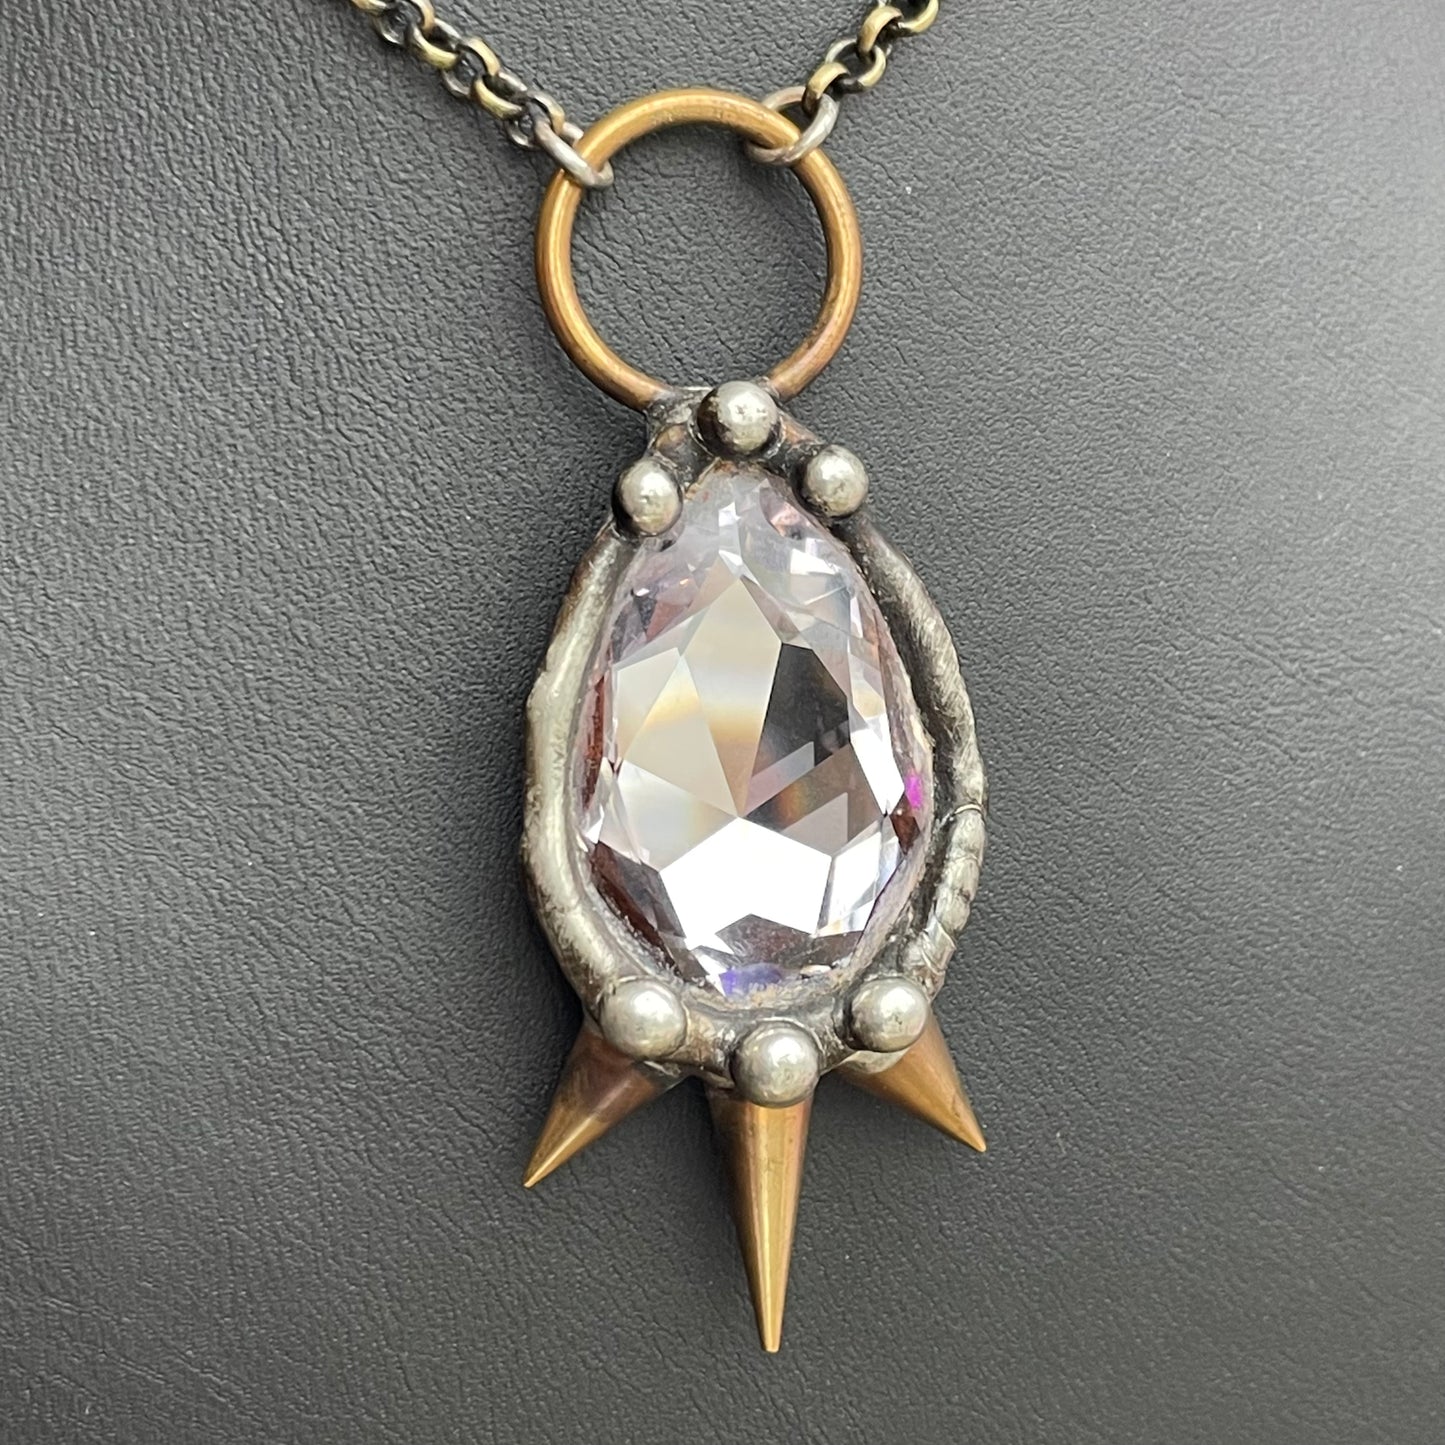 Spiked Teardrop Crystal Necklace